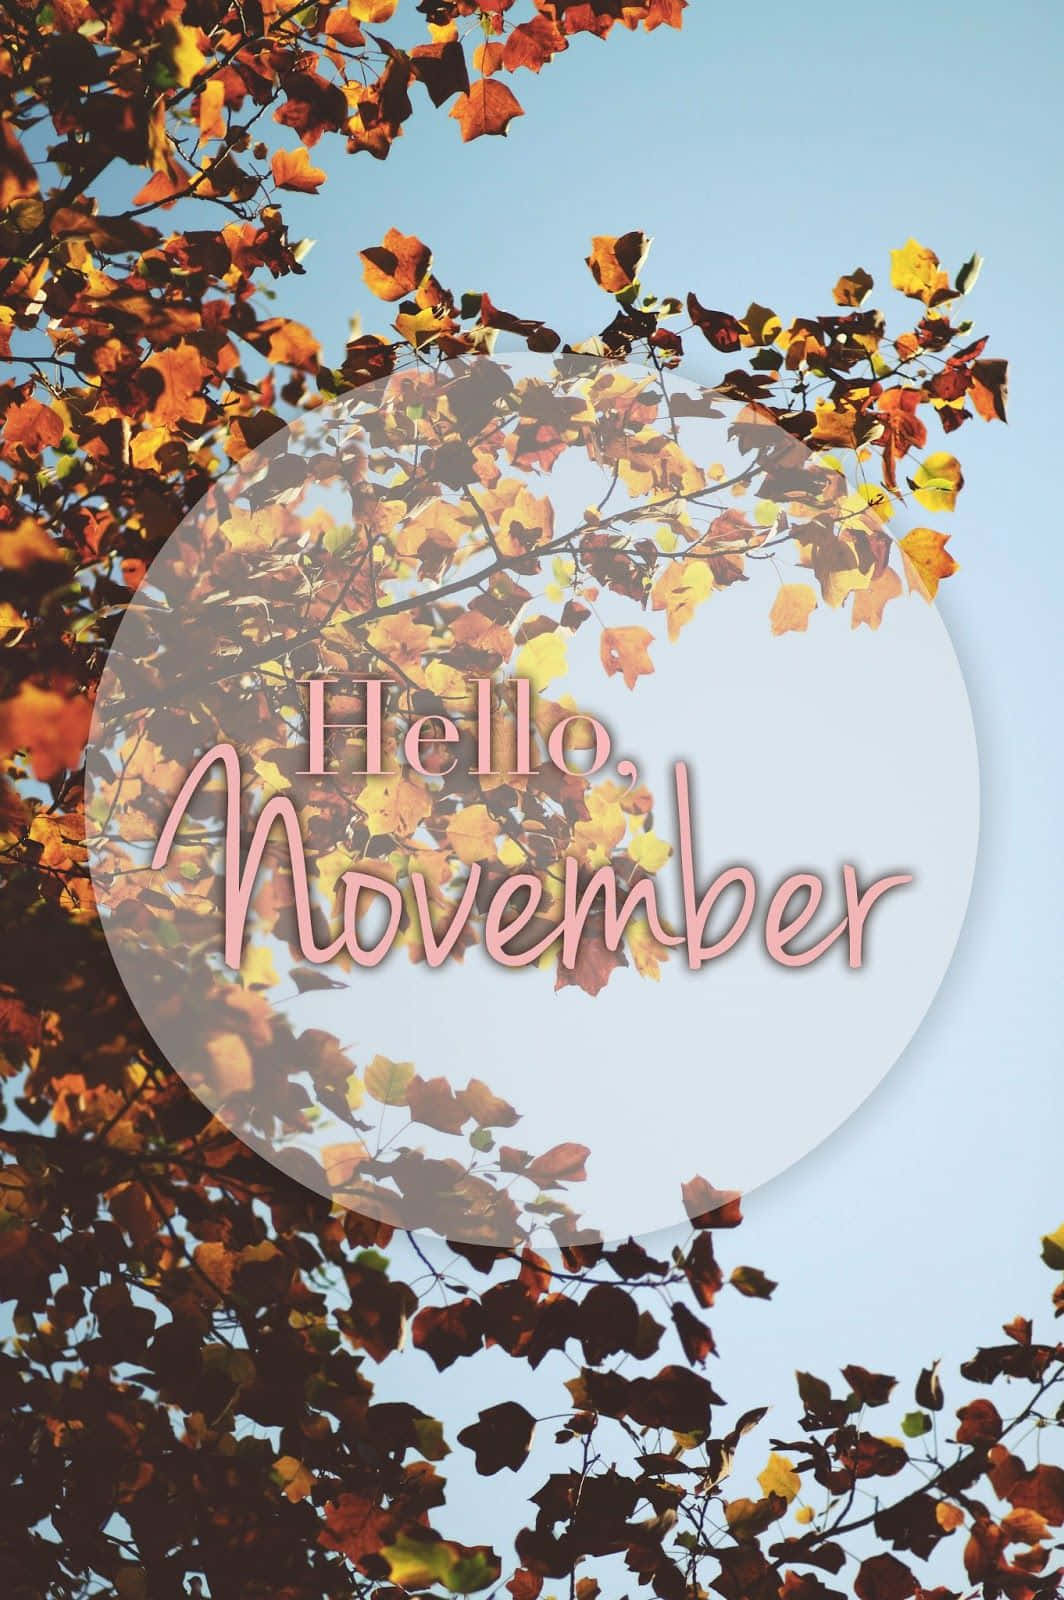 Cuddle Up Close And Enjoy The Warm Cozy Vibes Of November